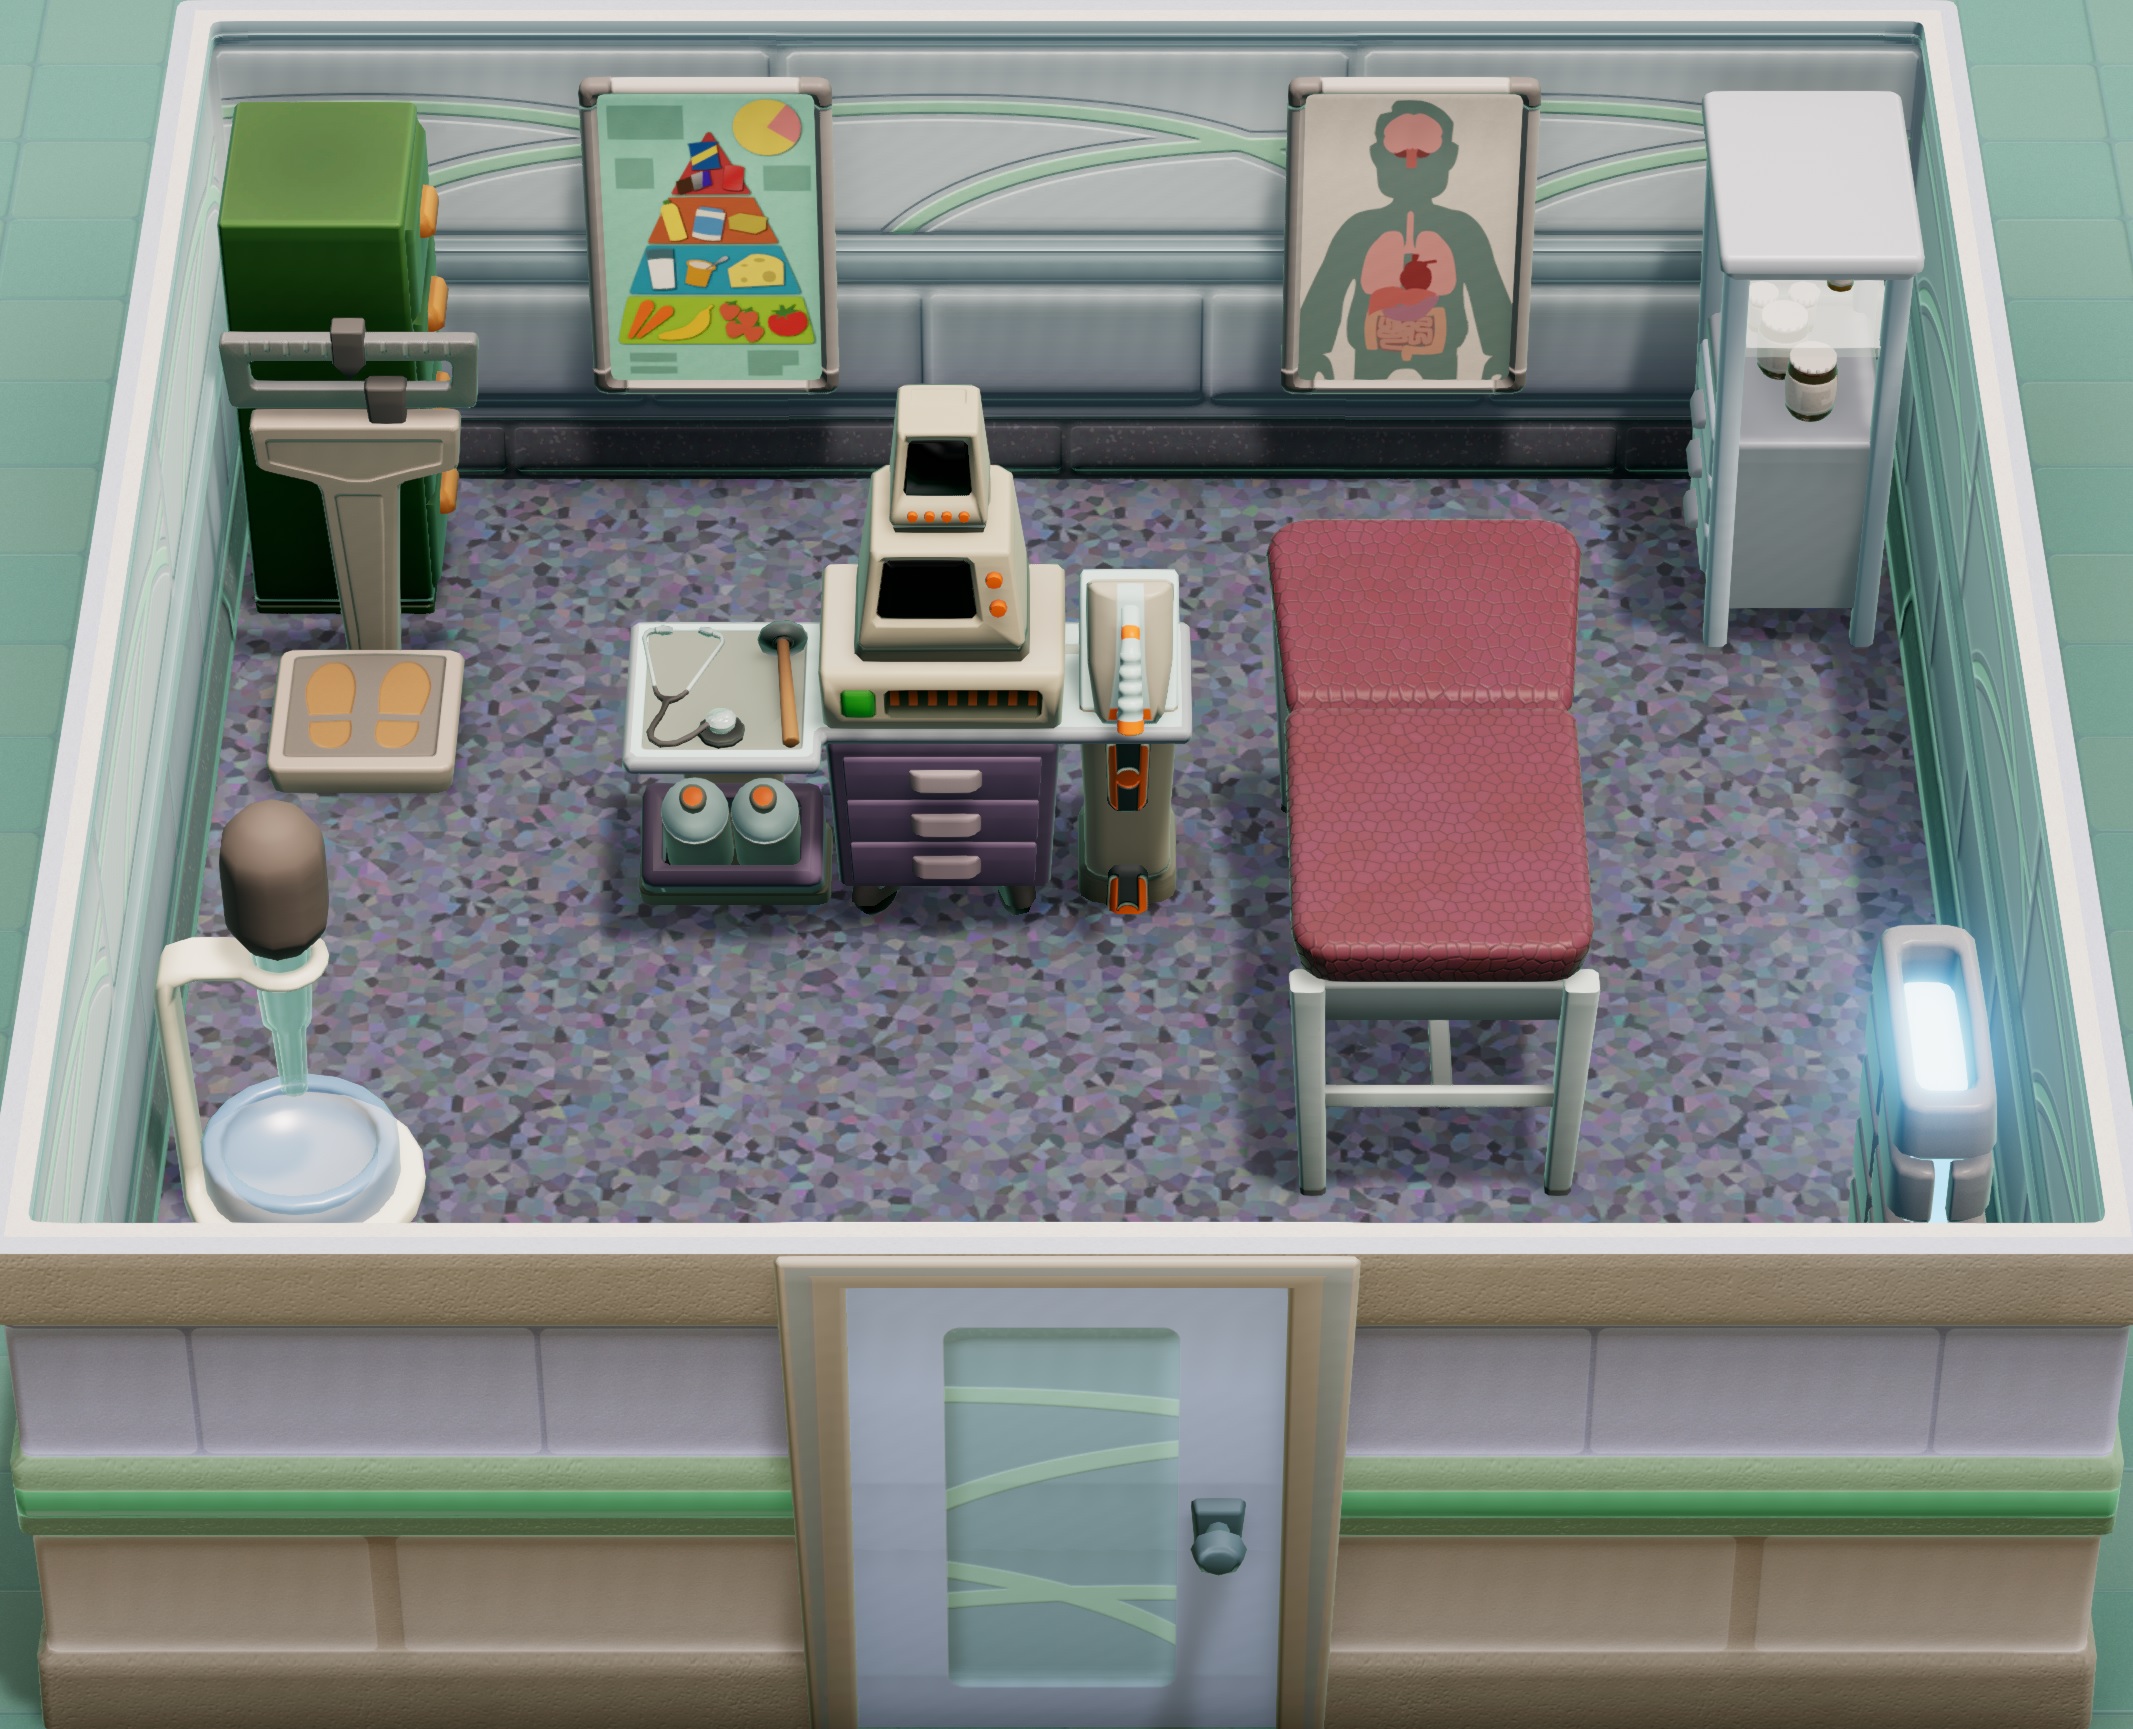 two point hospital diagnosis